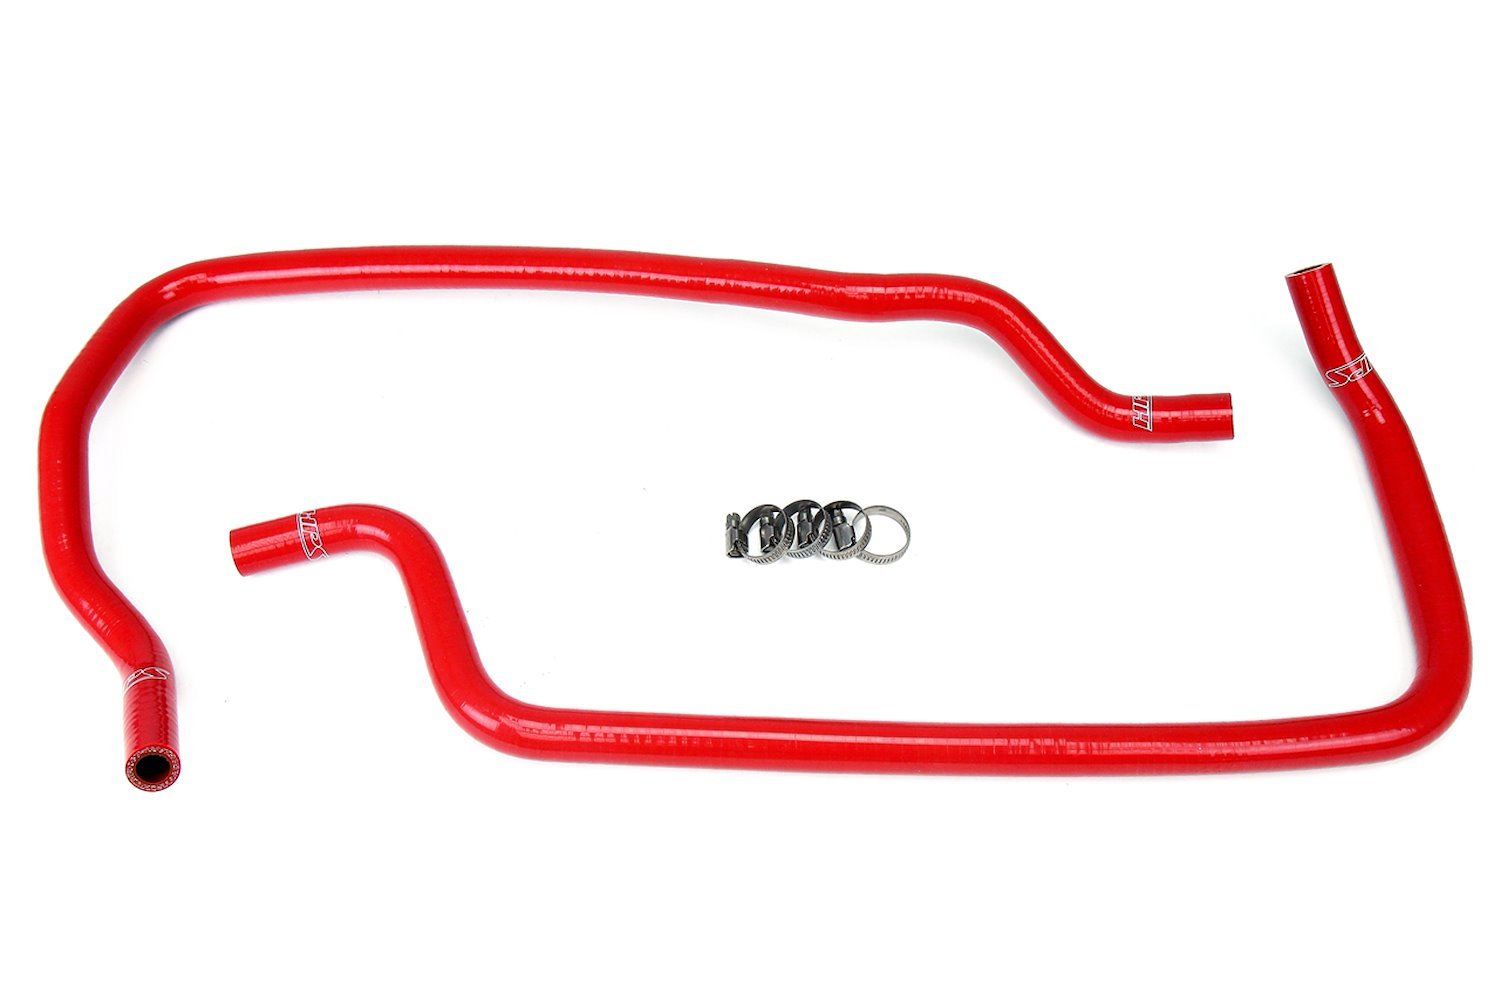 57-1449H-RED Heater Hose Kit, High-Temp 3-Ply Reinforced Silicone, Replace OEM Rubber Heater Coolant Hoses